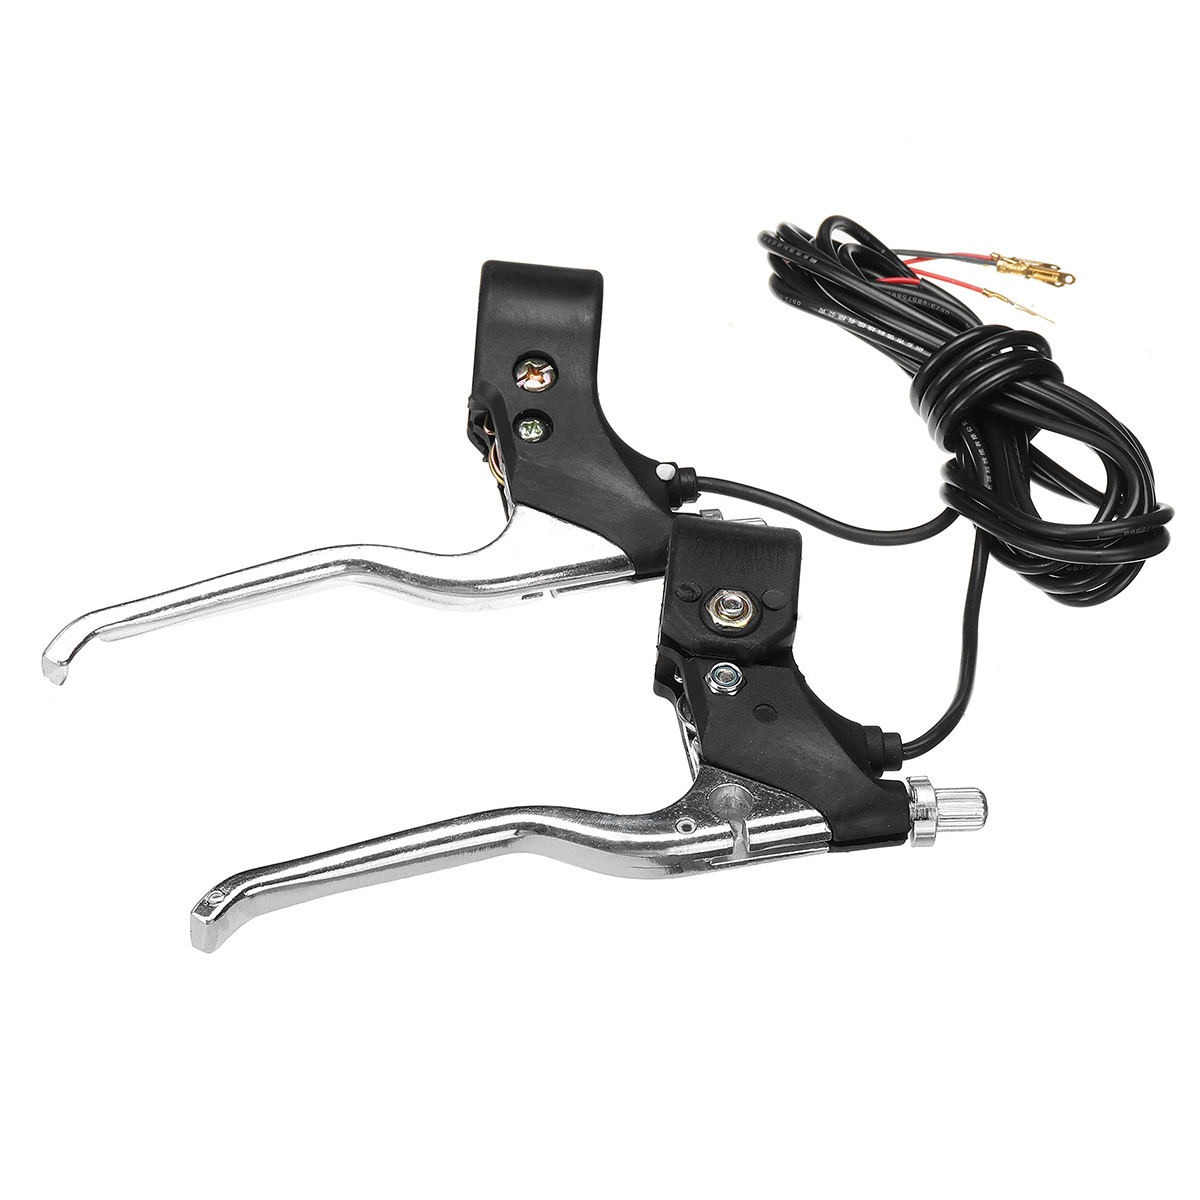 36V 250W Electric Bike Conversion Scooter Motor Controller Kit for 22-28Inch Ordinary Bike - Auto GoShop